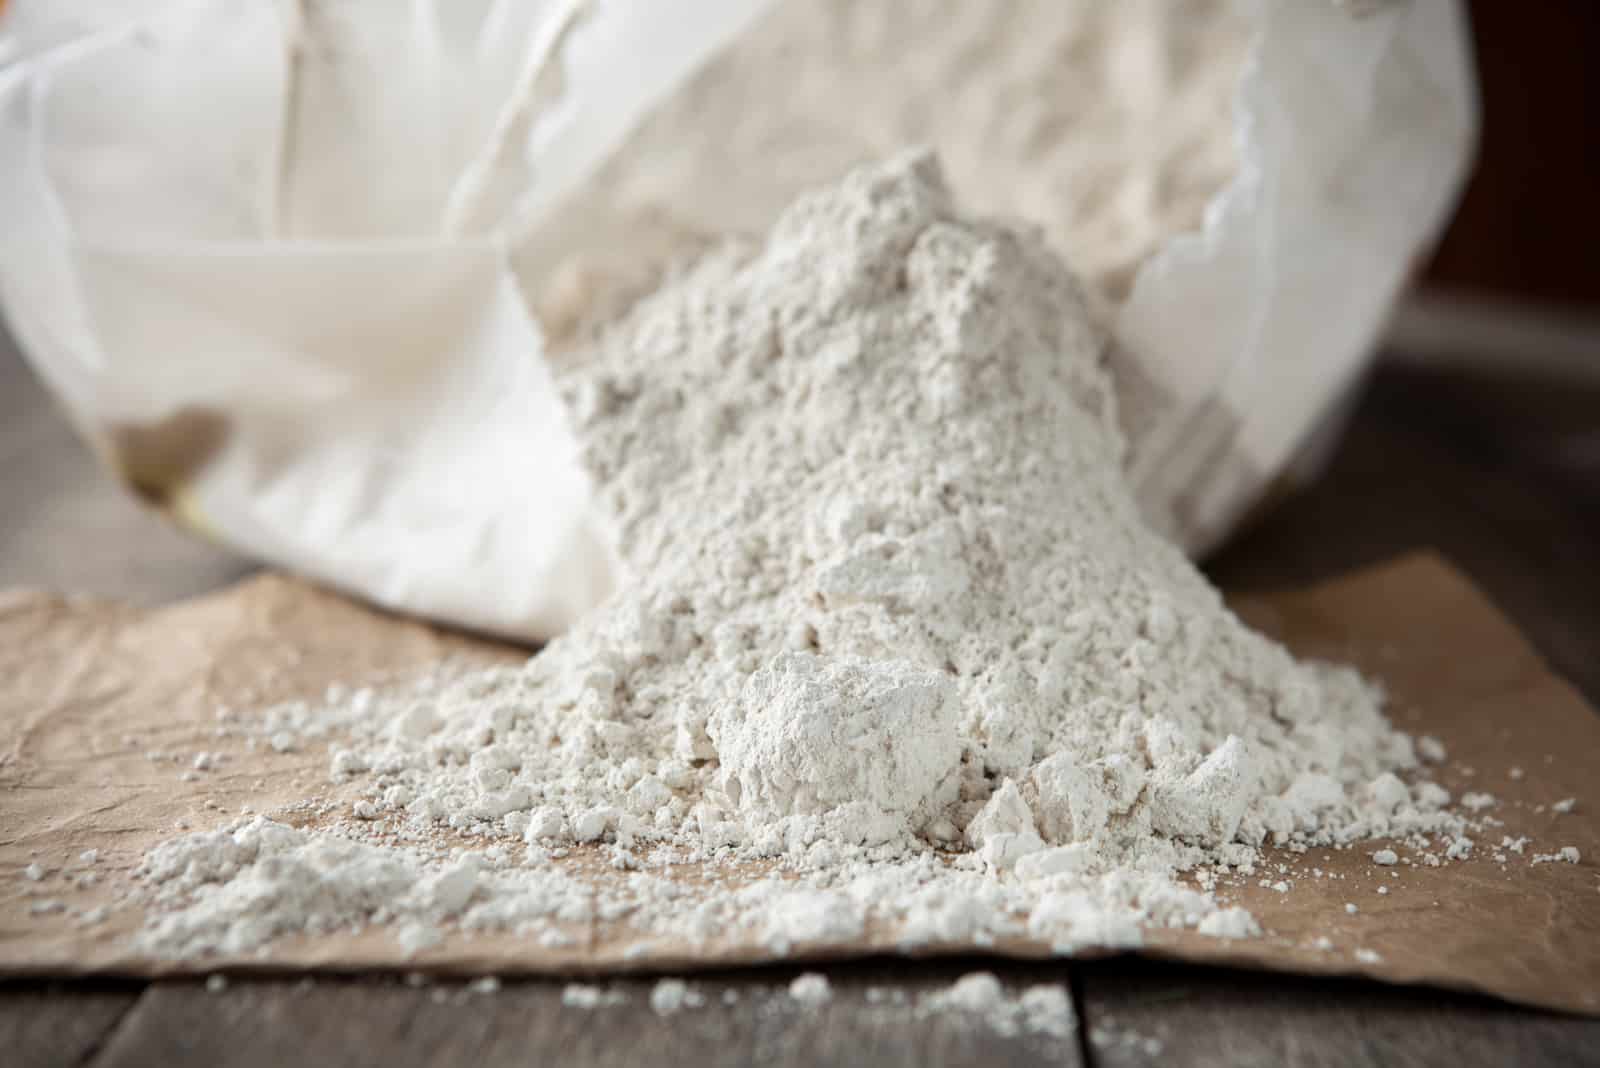 Diatomaceous Earth on the table